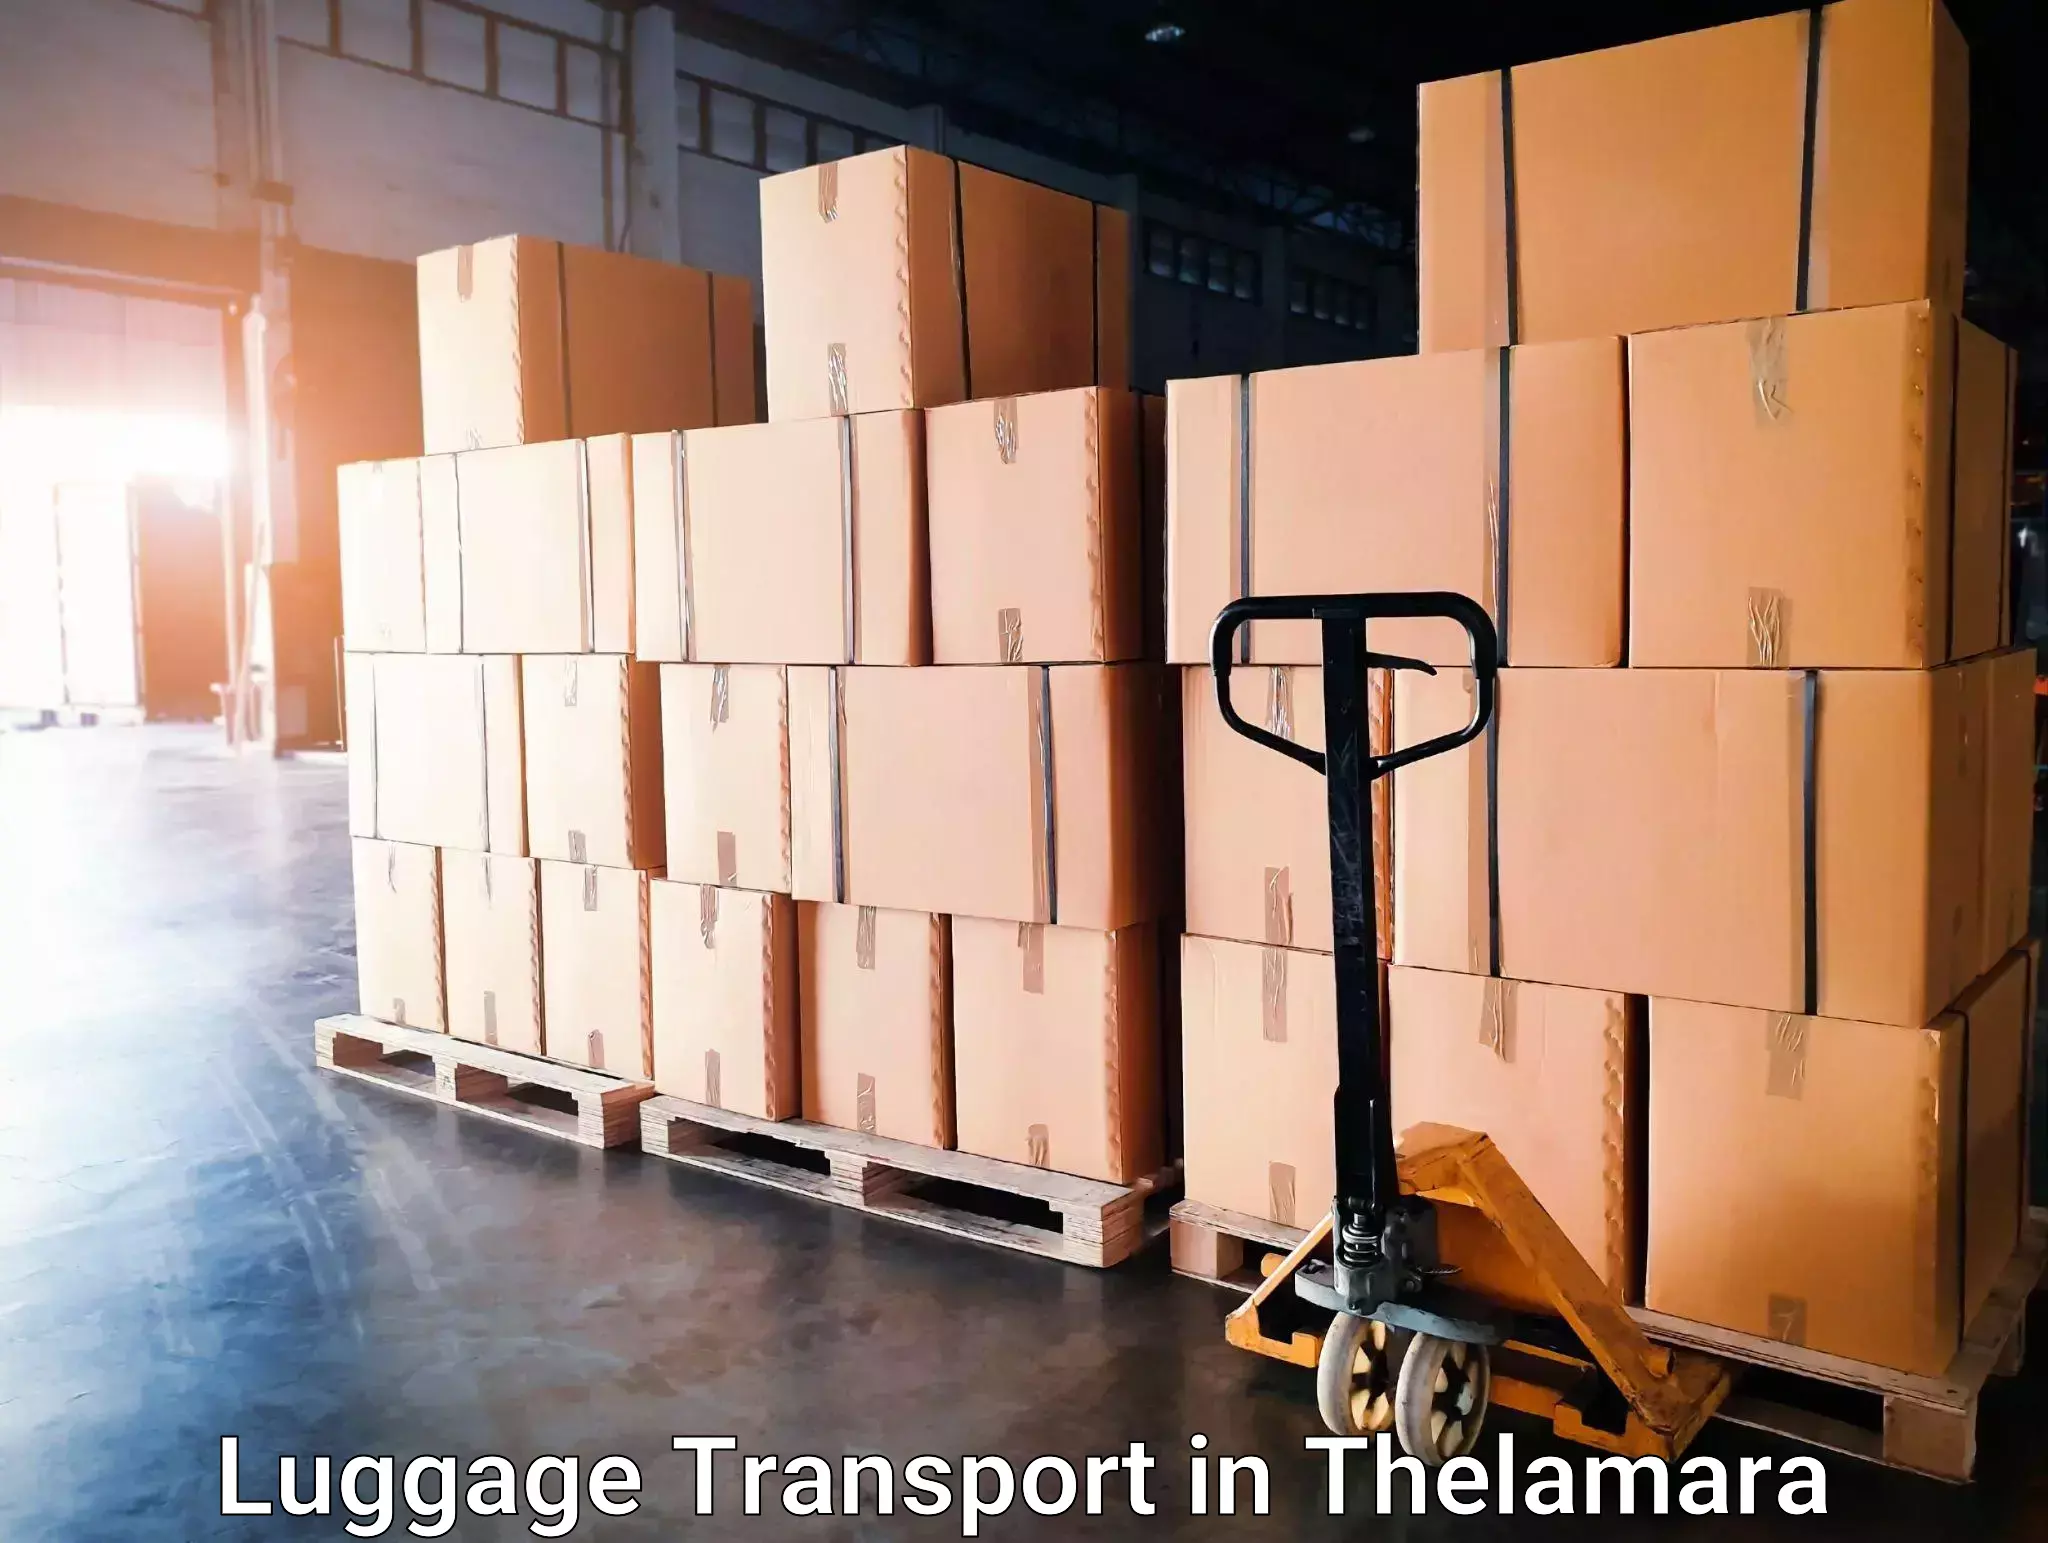 Luggage storage and delivery in Thelamara